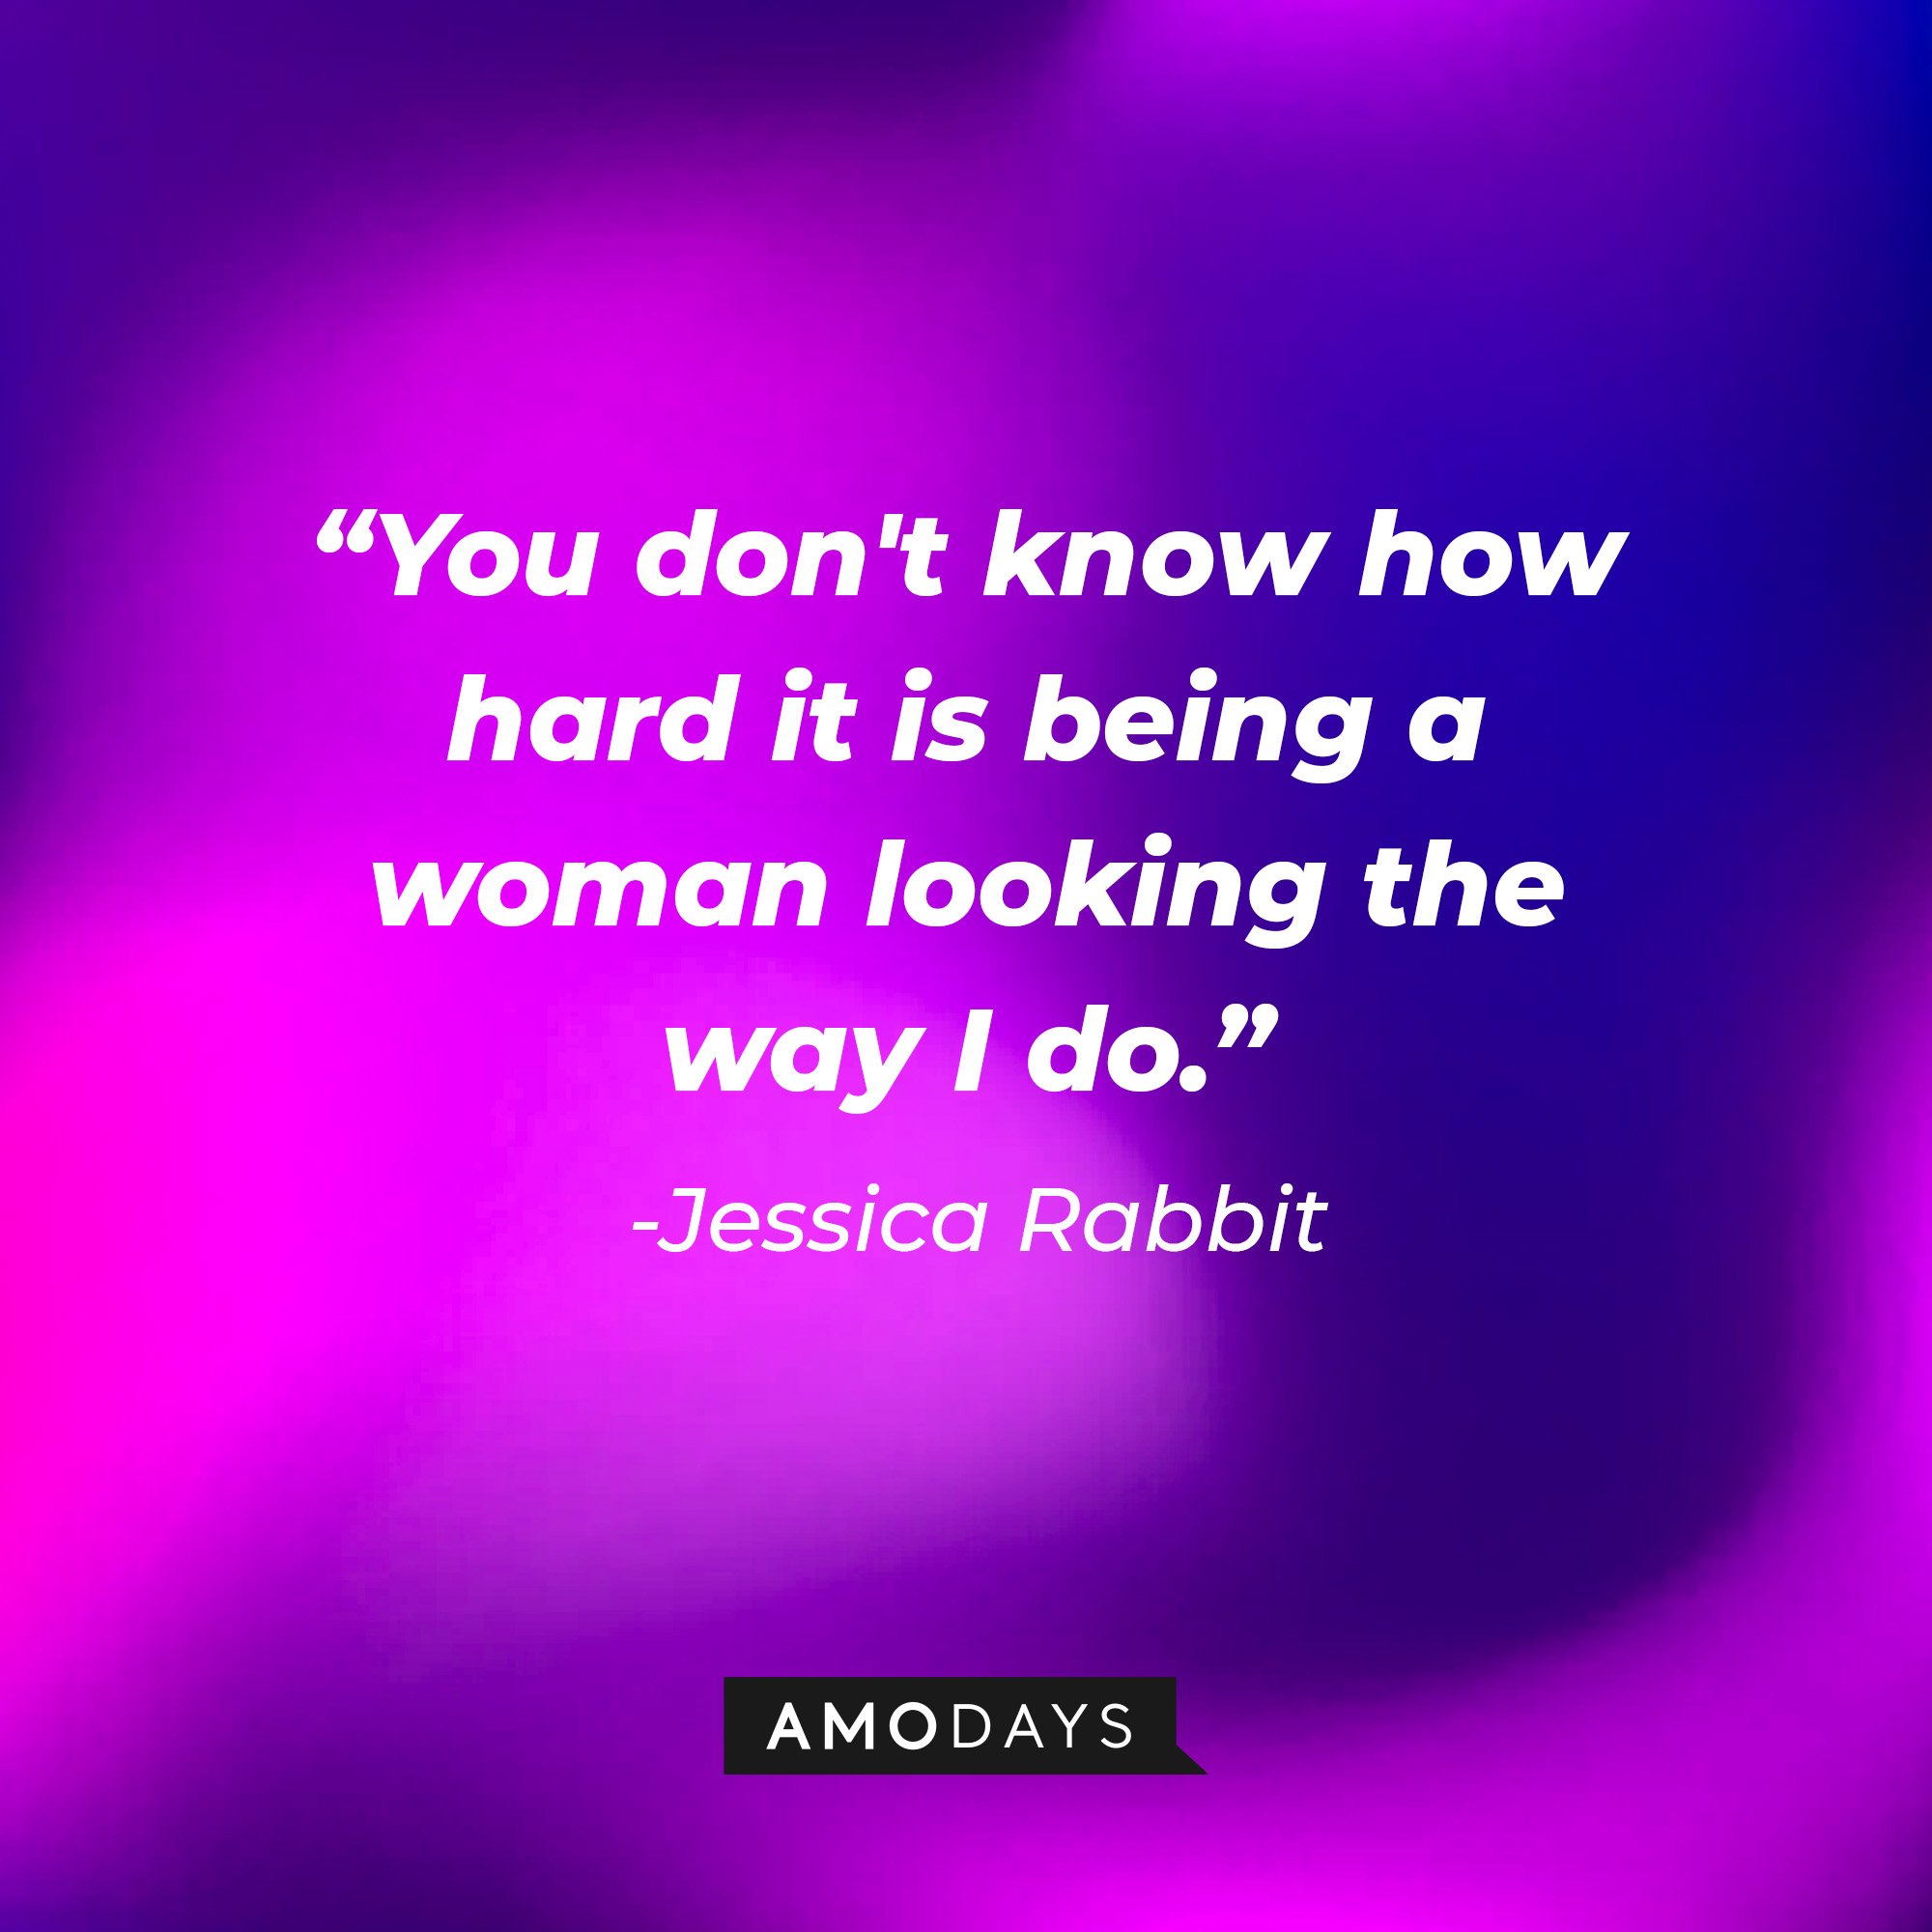 Jessica Rabbit’s quote: “You don't know how hard it is being a woman looking the way I do.” | Image: AmoDays